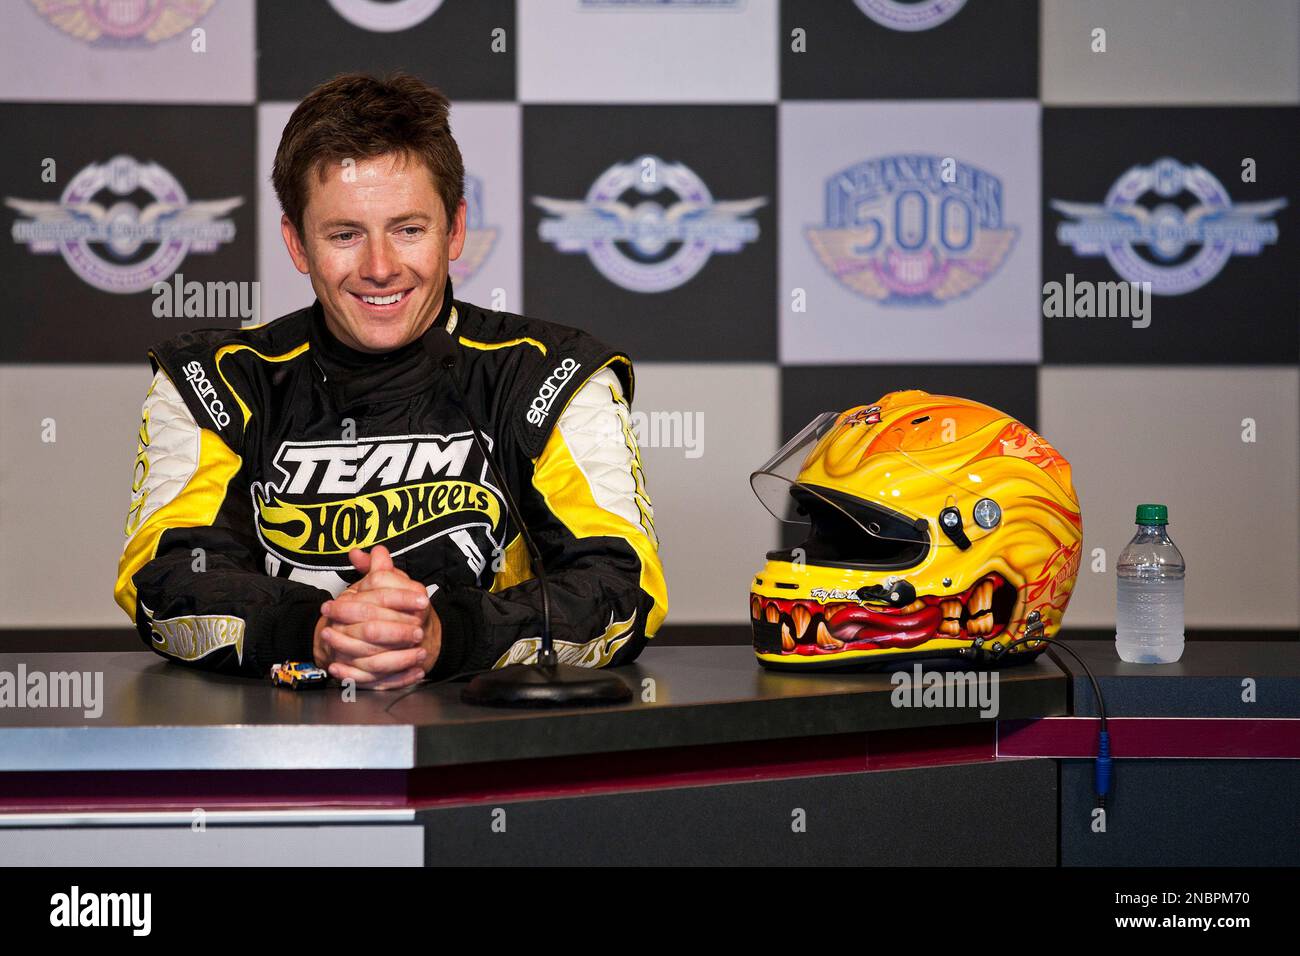 https://c8.alamy.com/comp/2NBPM70/team-hot-wheels-driver-tanner-foust-right-laughs-at-a-question-at-a-press-conference-after-he-set-a-new-world-record-with-a-332-foot-distance-jump-at-the-izod-presents-hot-wheels-fearless-at-the-500-on-sunday-may-29-2011-in-indianapolis-ross-dettmanap-images-for-mattel-2NBPM70.jpg